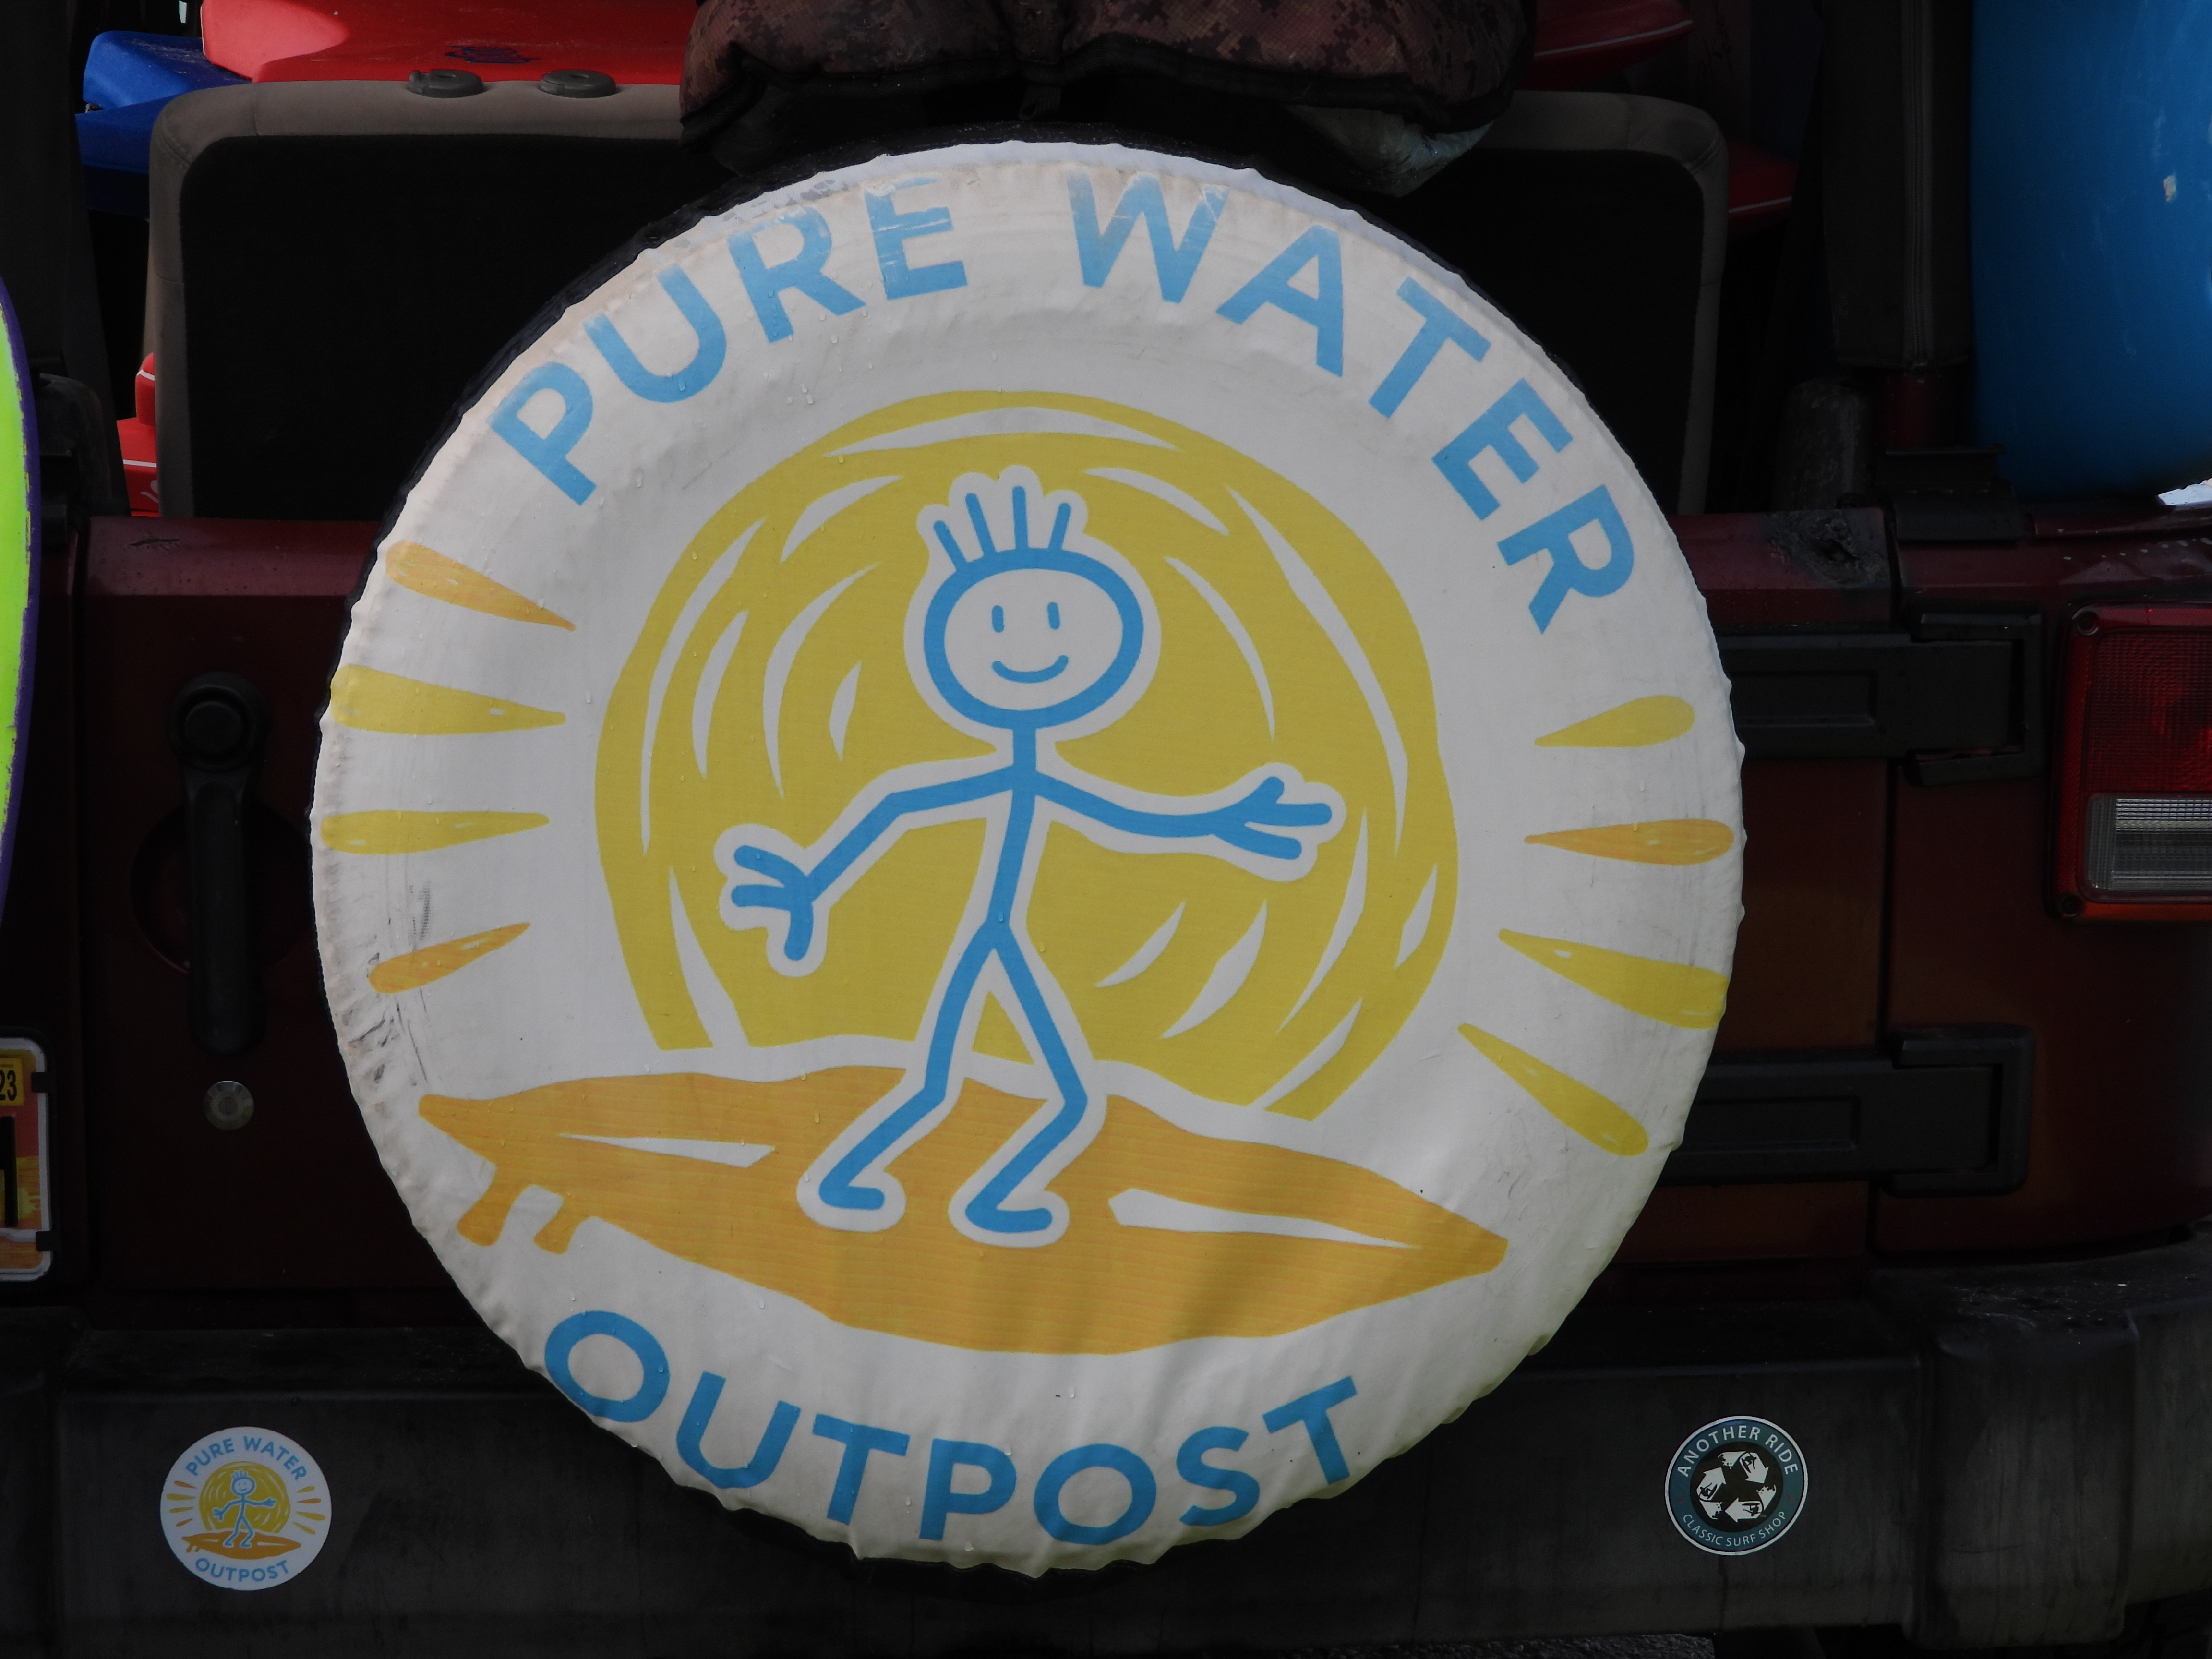 Pure Water Outpost